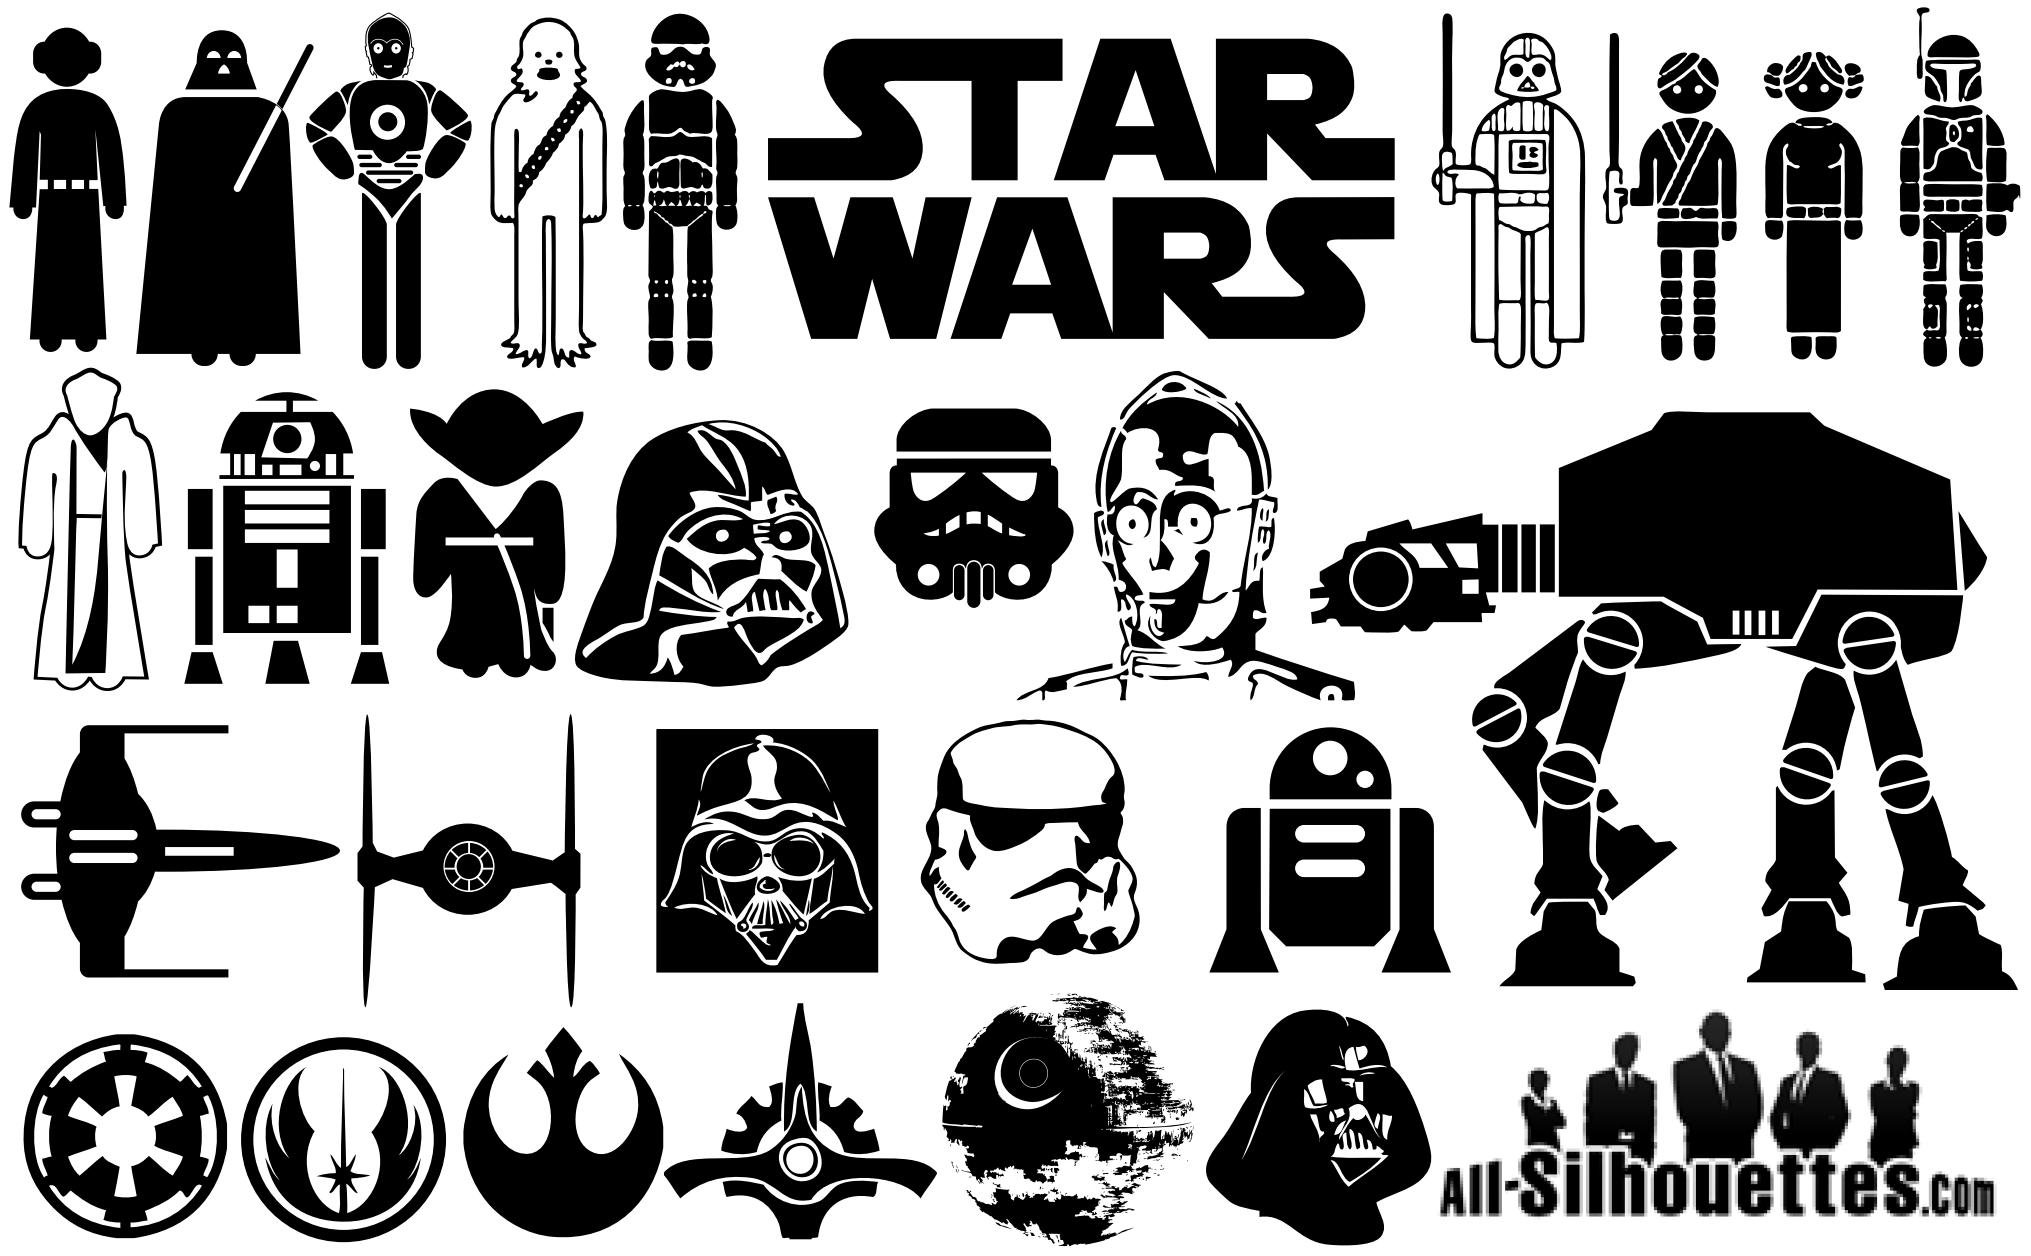 Star wars silhouettes clipart free   AbeonCliparts Cliparts